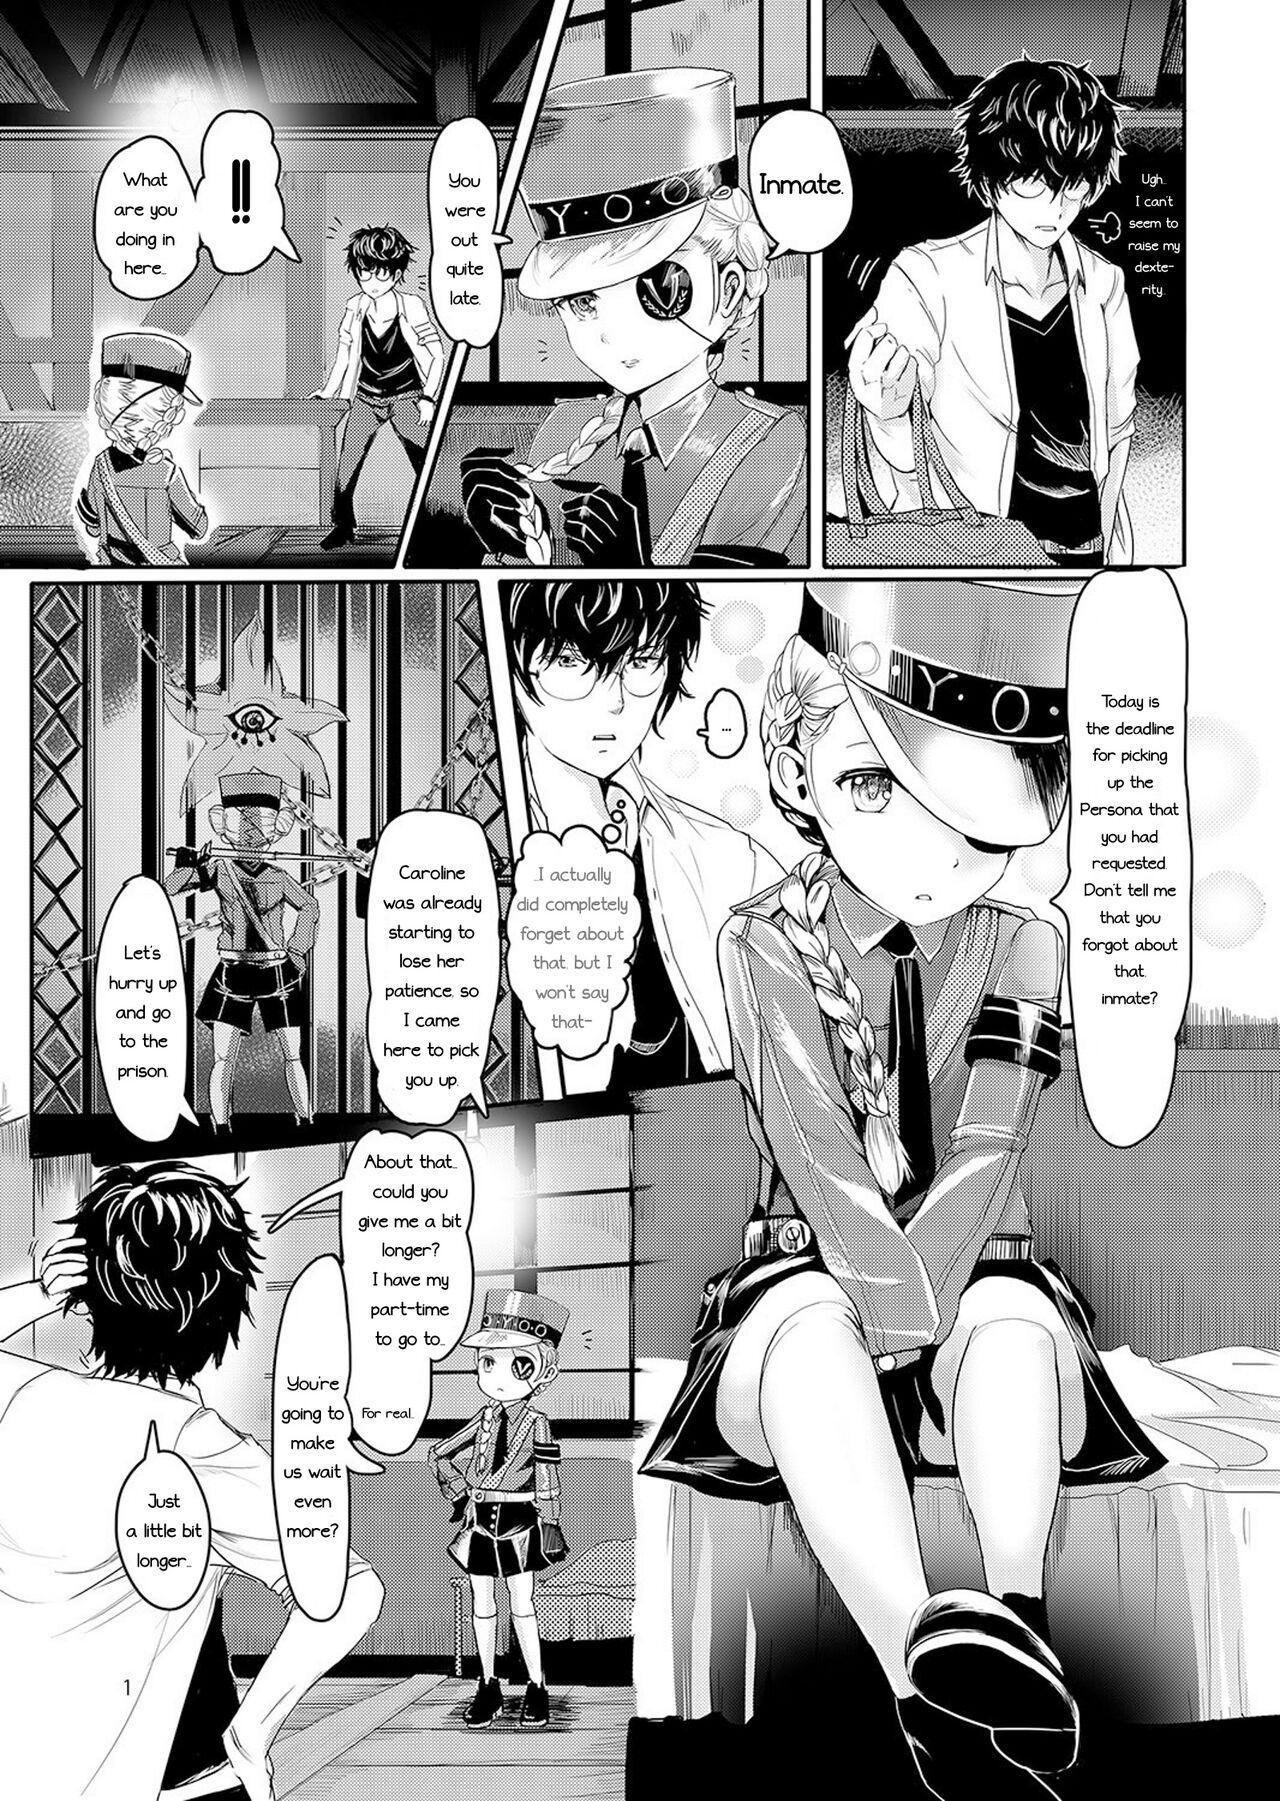 Amature Justing - Persona 5 Eurosex - Page 2